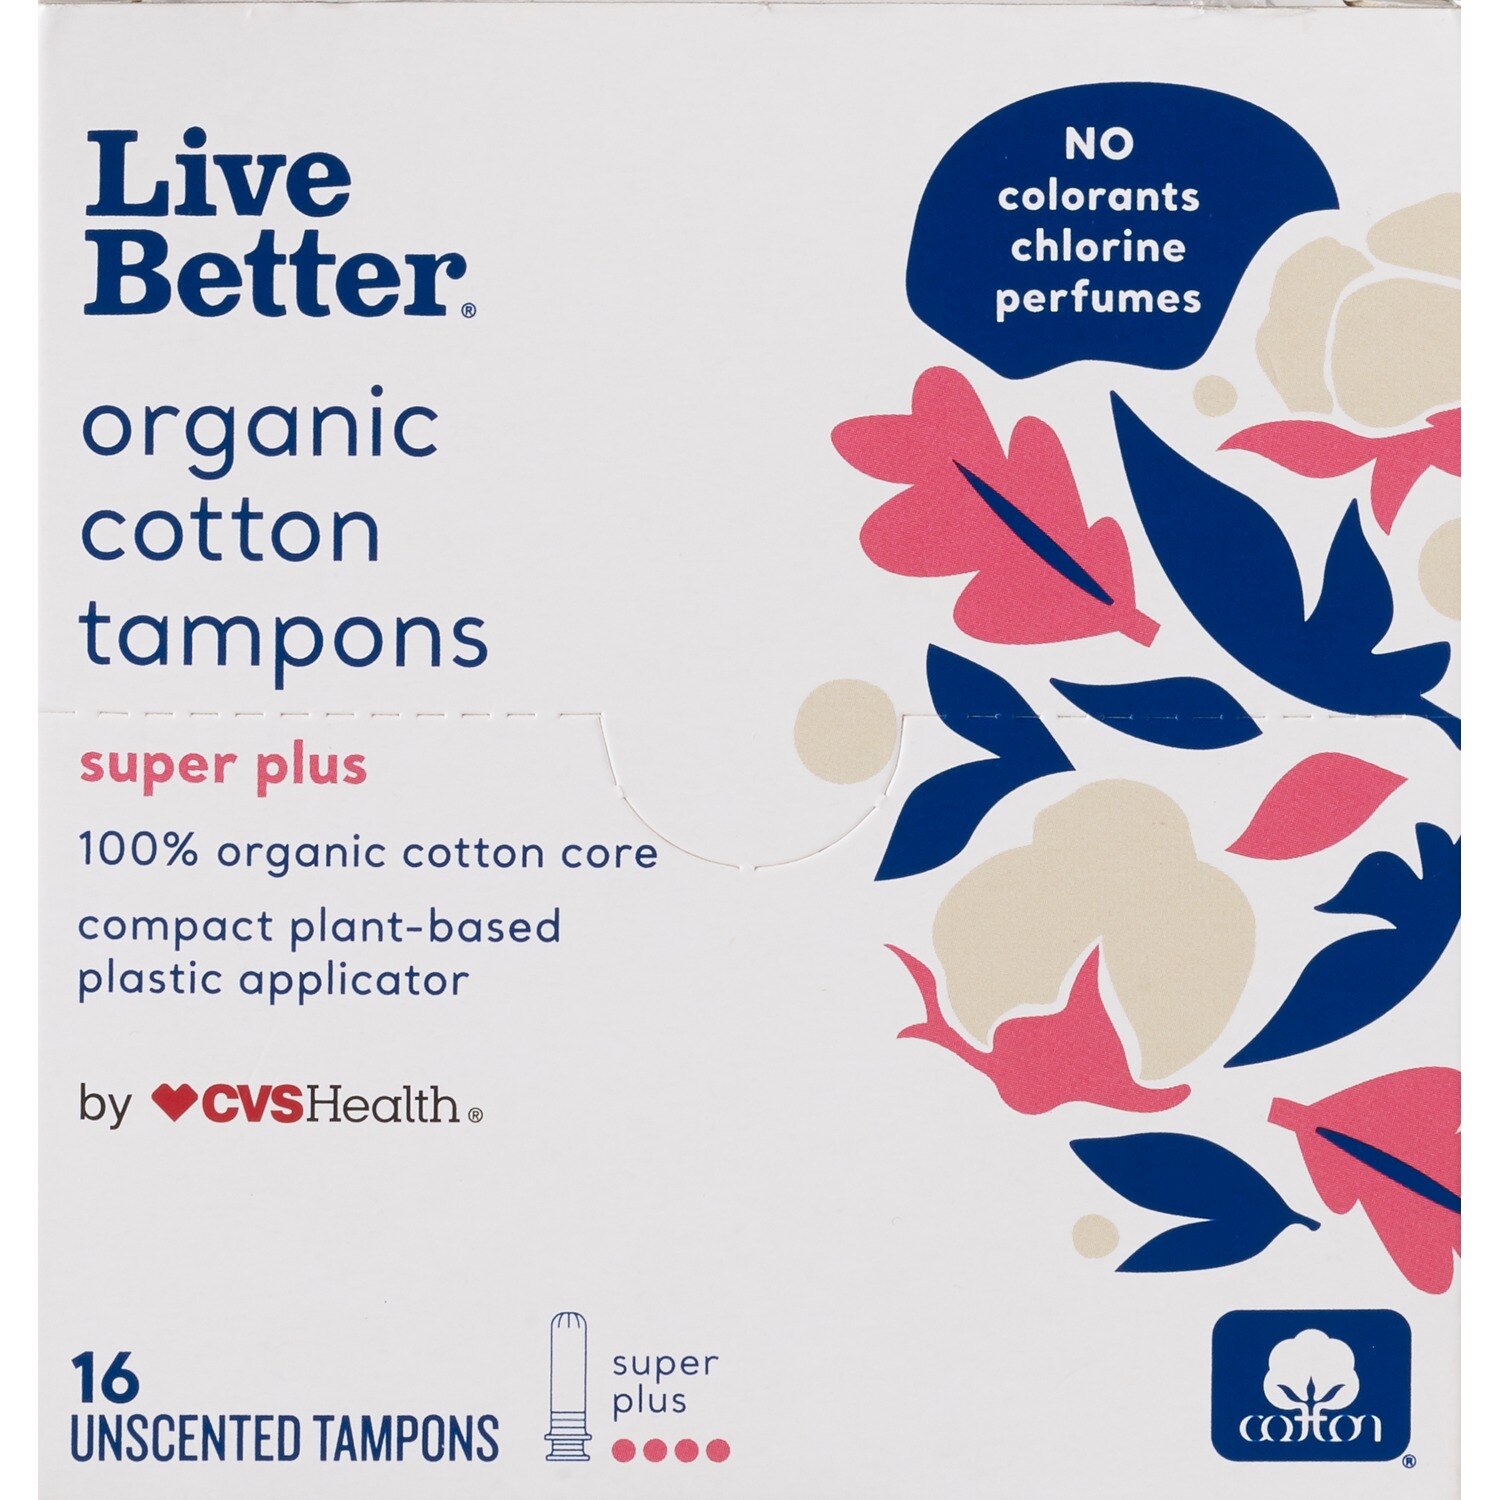 CVS Live Better Organic Cotton Tampons with Compact Plant-Based Plastic Applicator, Super Plus, 16 CT